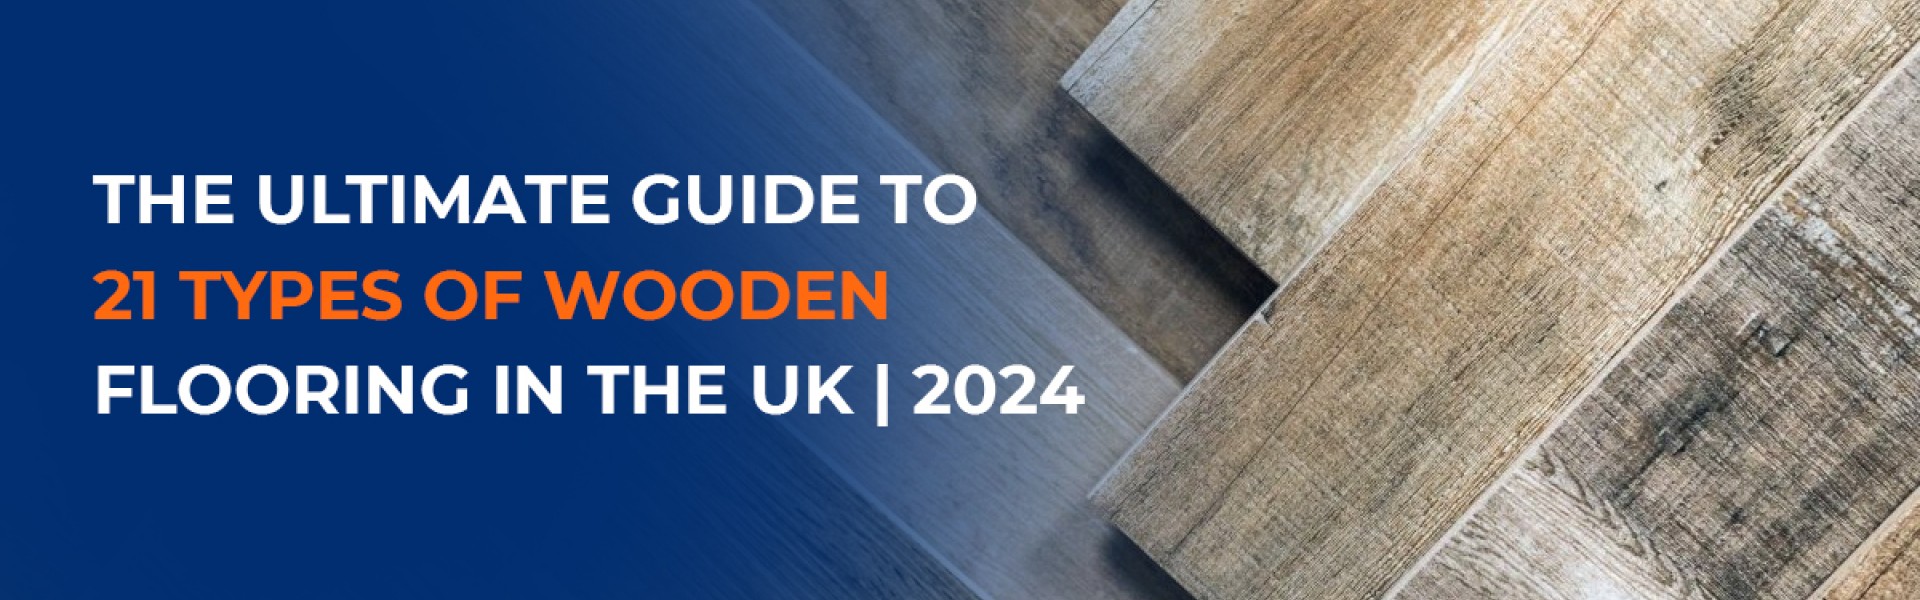 The Ultimate Guide to 21 Types of Wooden Flooring in the UK | 2024